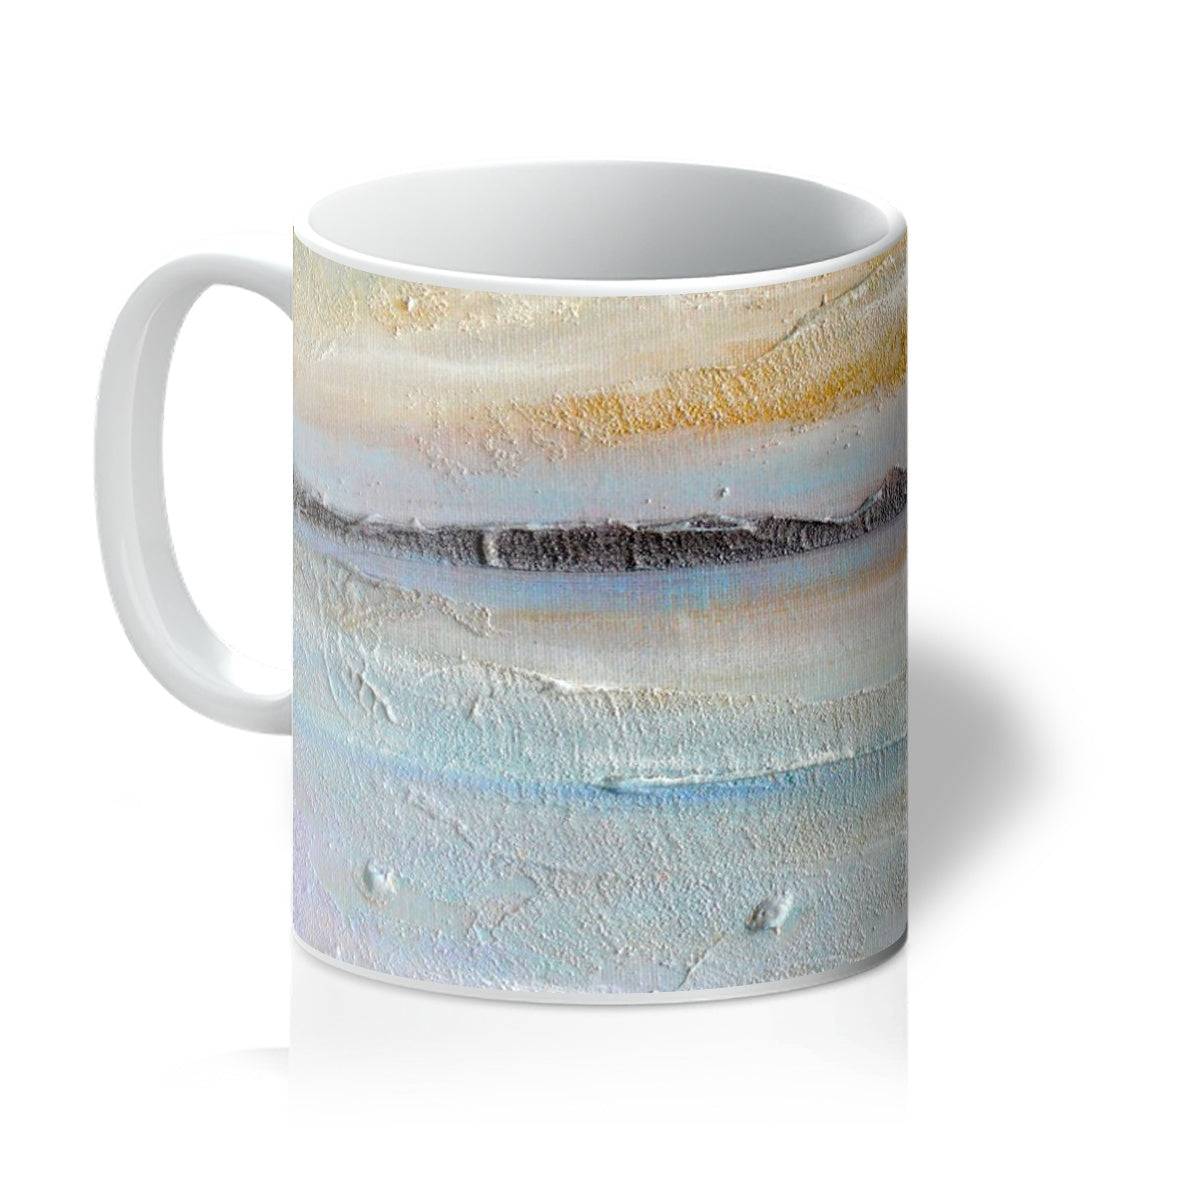 Sollas Beach South Uist Art Gifts Mug-Mugs-Hebridean Islands Art Gallery-11oz-White-Paintings, Prints, Homeware, Art Gifts From Scotland By Scottish Artist Kevin Hunter